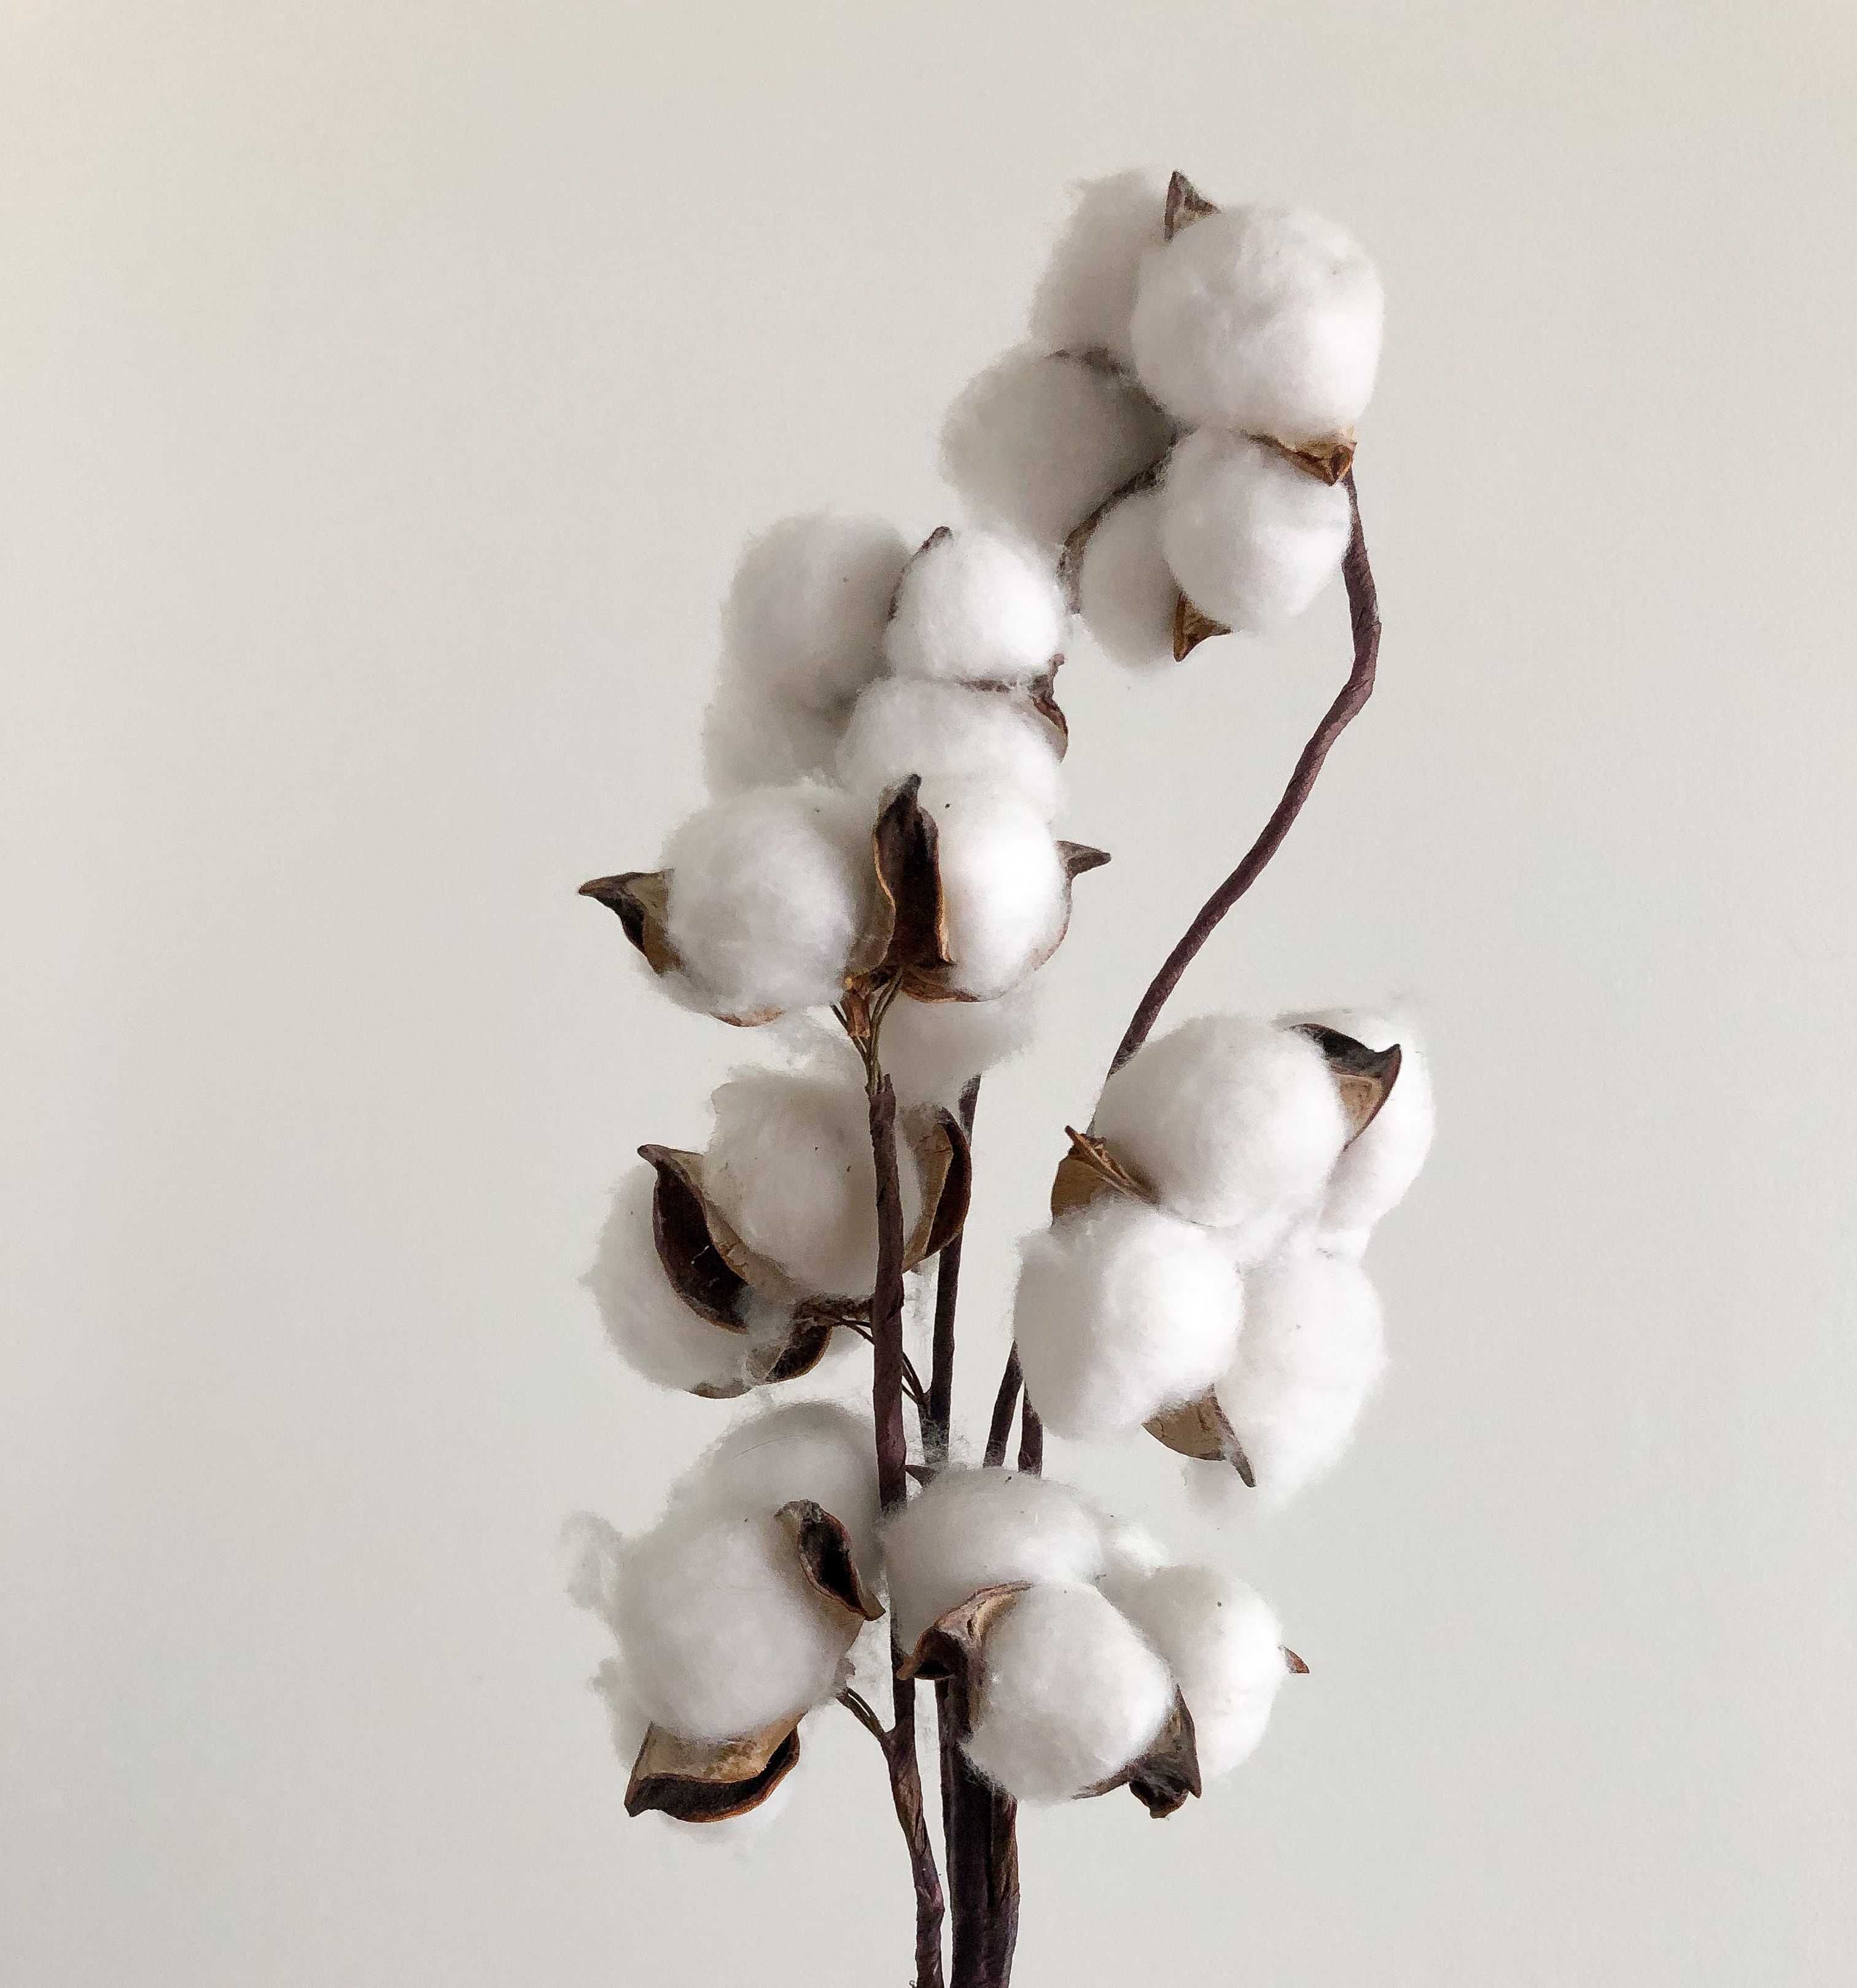 Photo of raw cotton on a stem